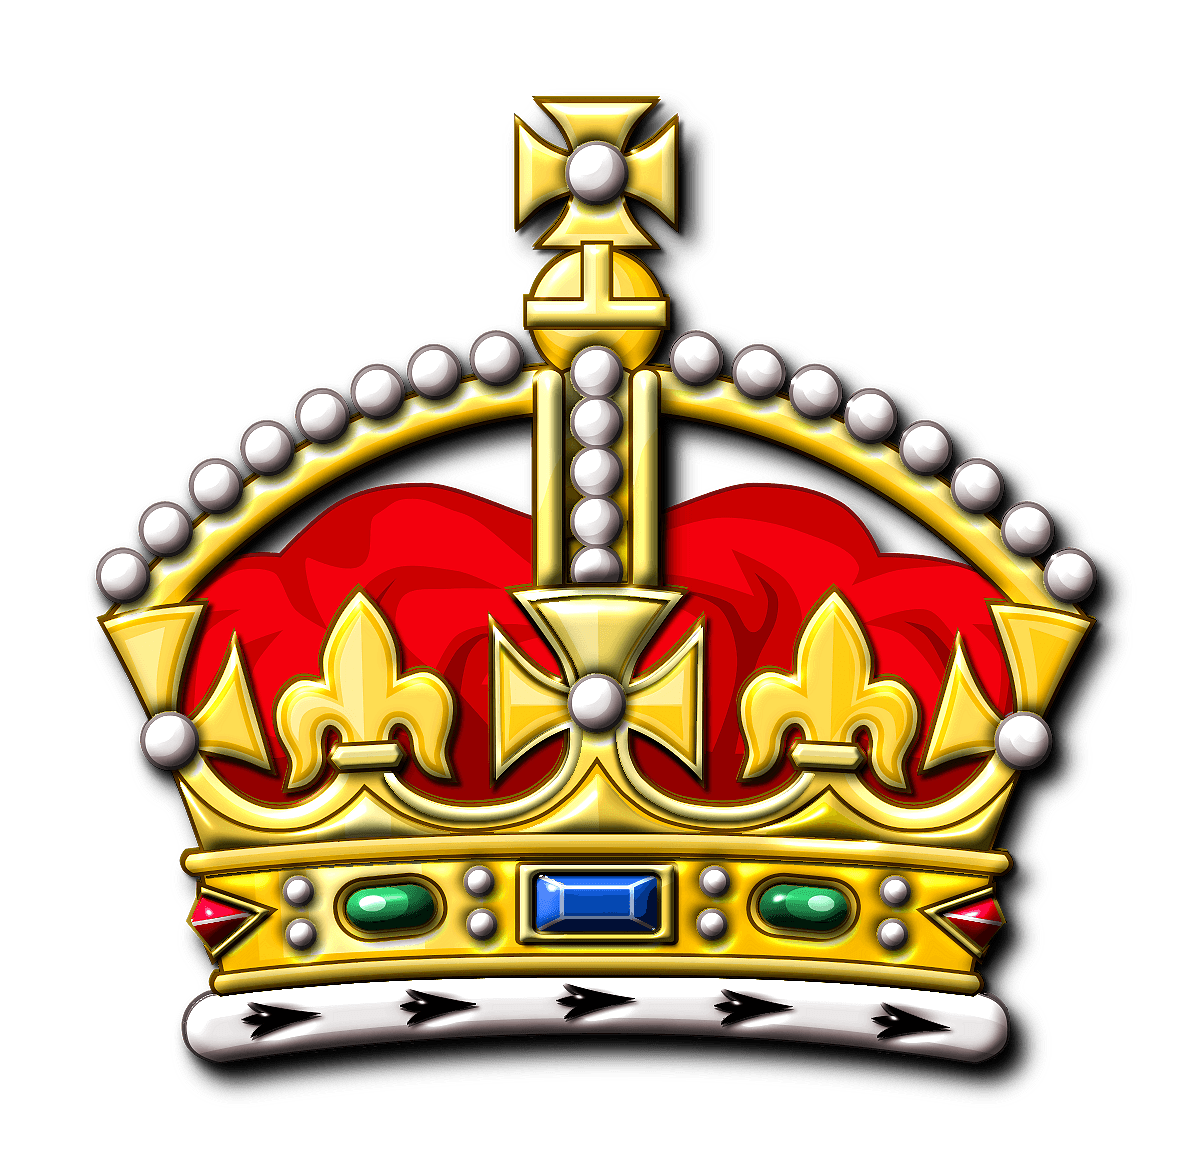 Red and Gold Crown Logo - Free Kings Crown Logo, Download Free Clip Art, Free Clip Art on ...